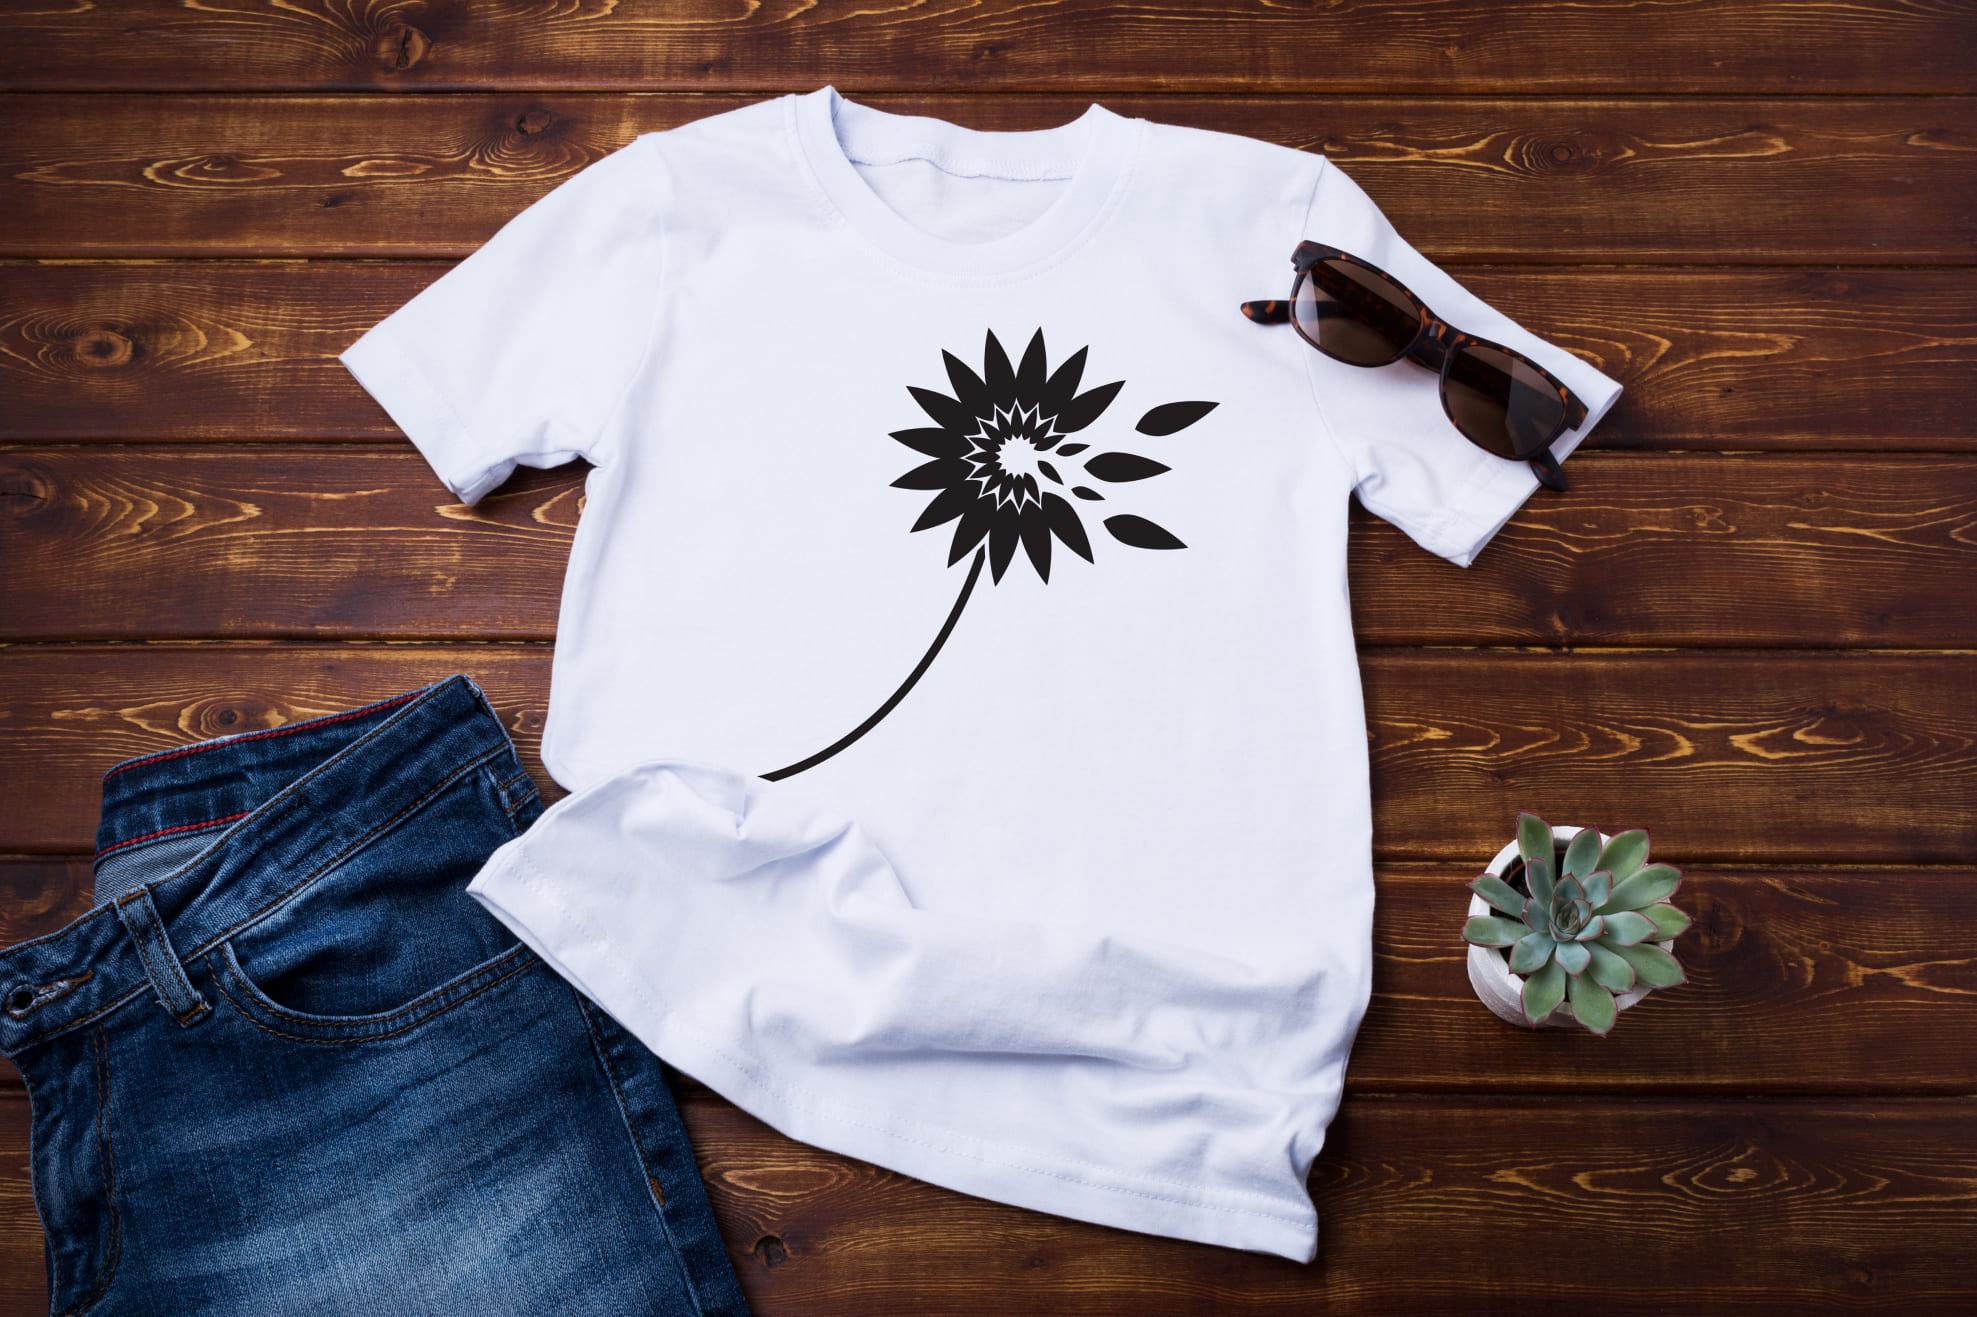 T-shirt image with amazing dandelion print in black color.